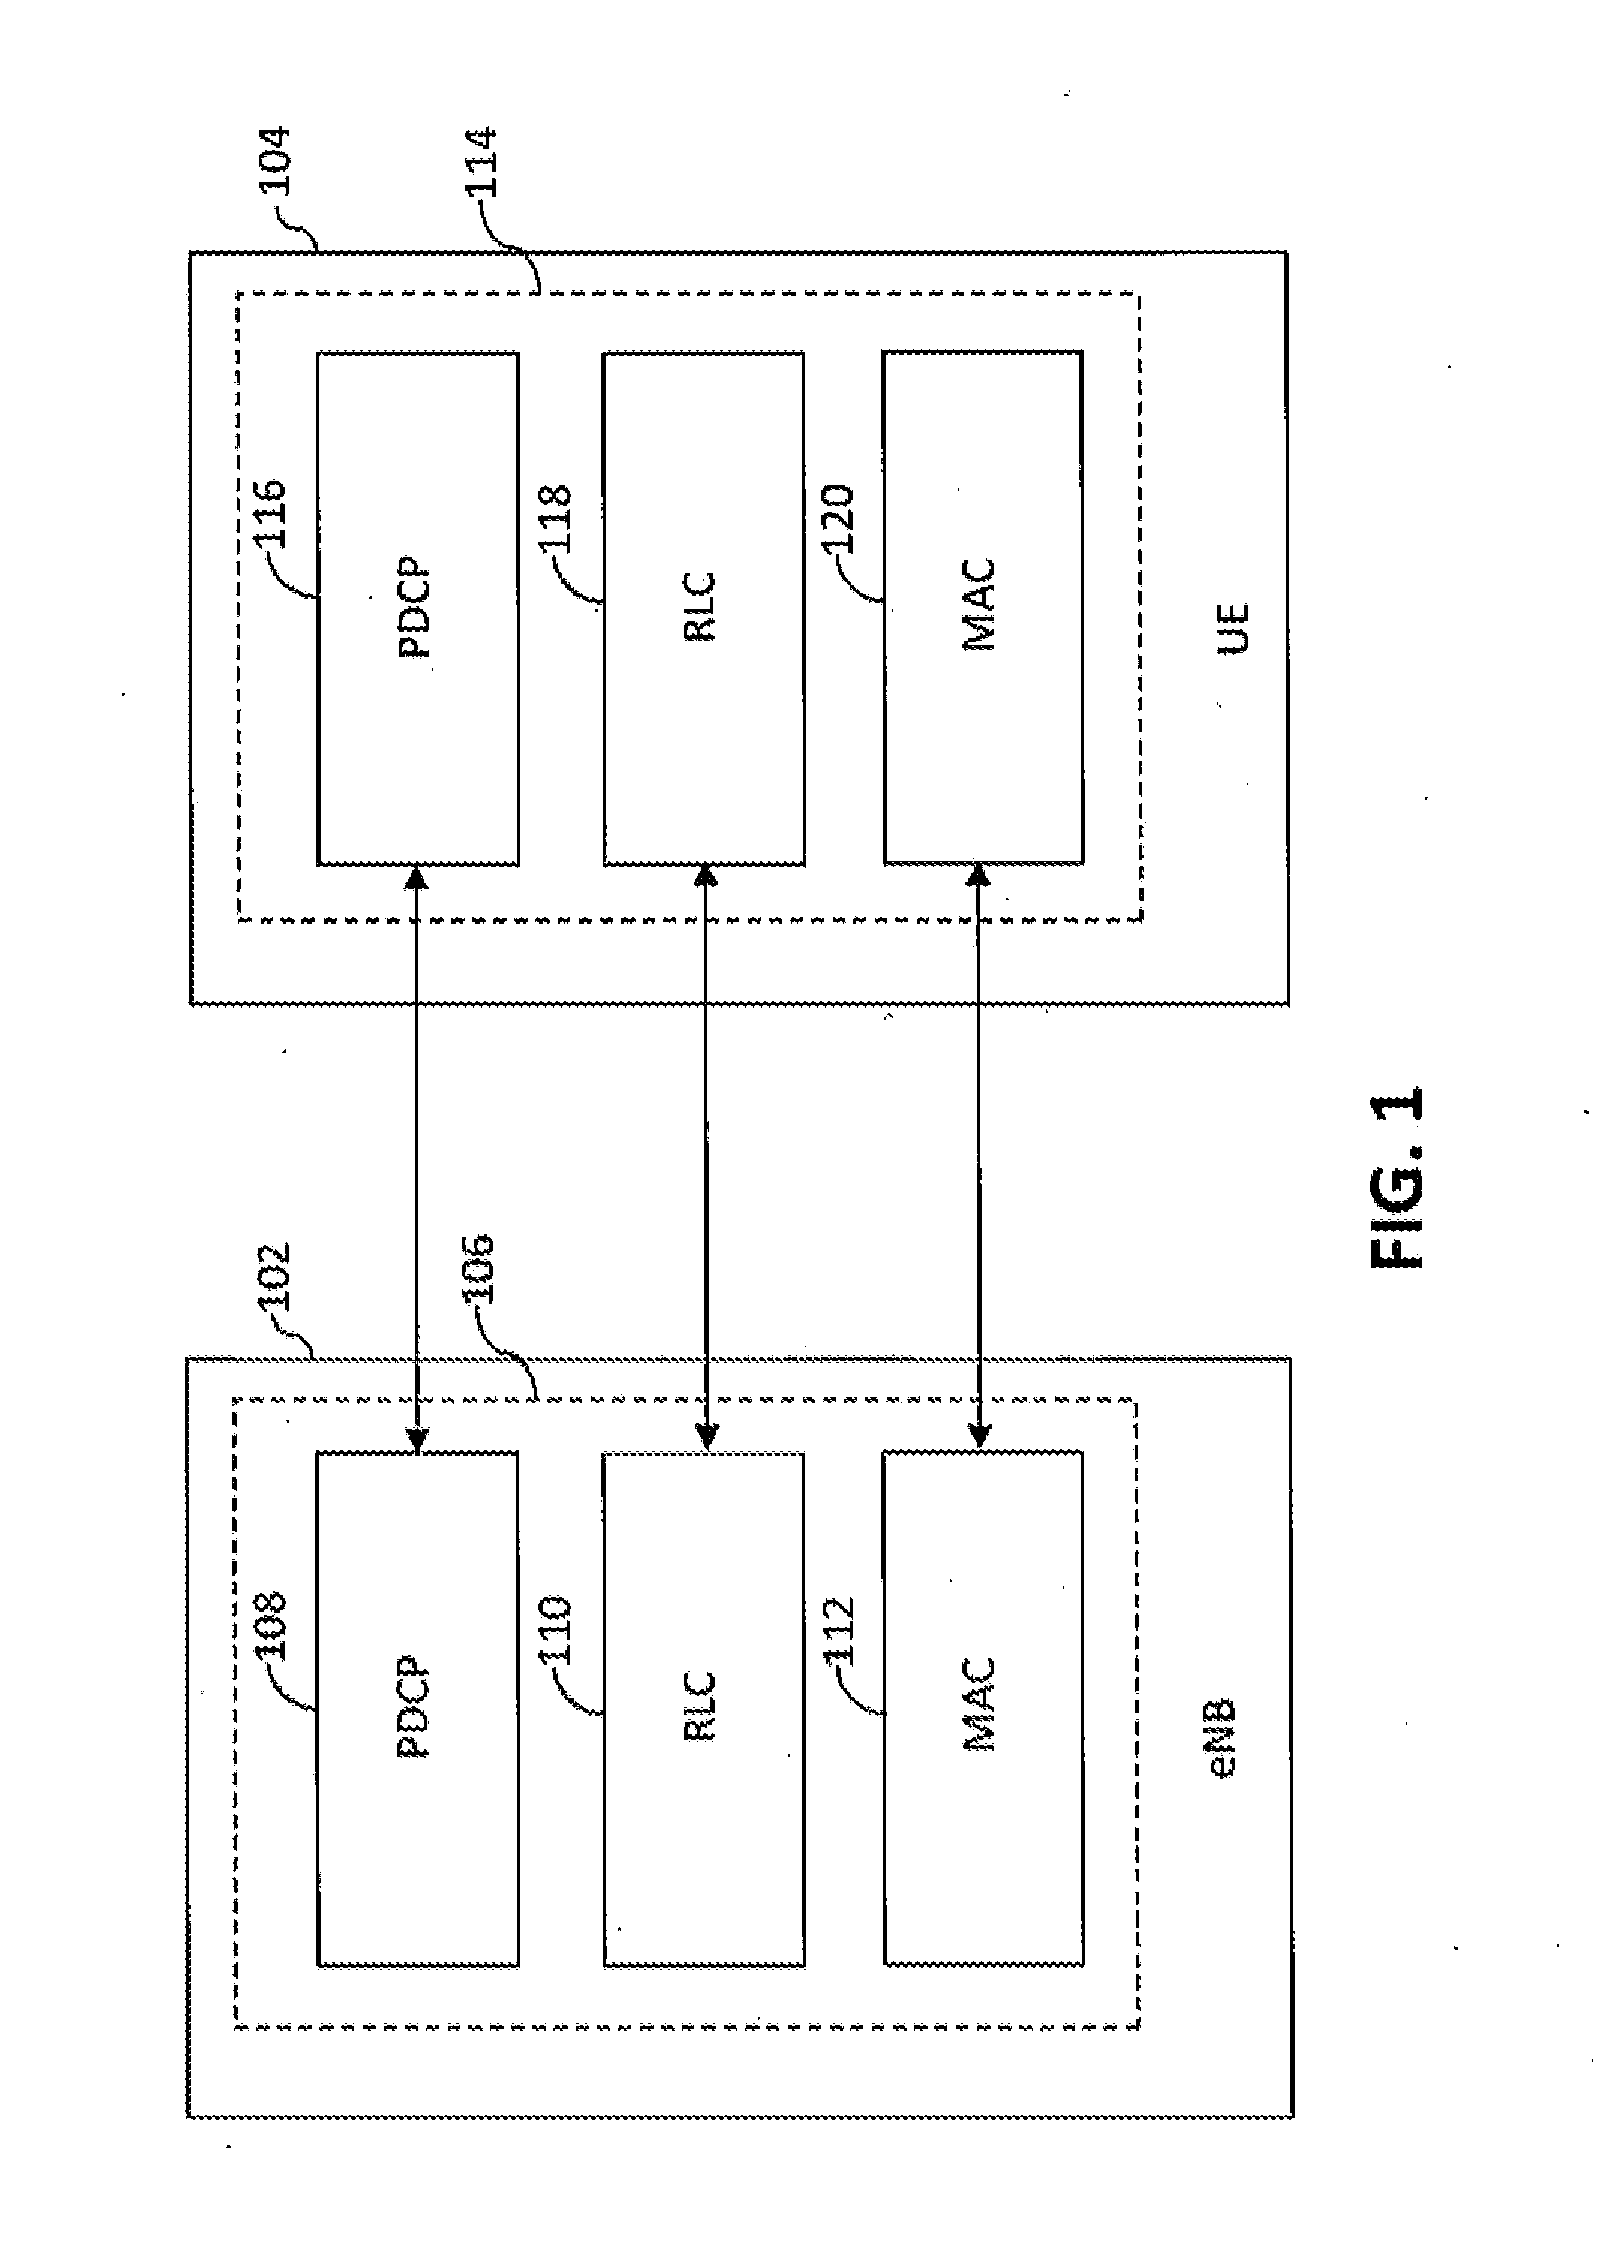 SYSTEM AND METHOD FOR CREATING LOGICAL RADIO LINK CONTROL (RLC) AND MEDIUM ACCESS CONTROL (MAC) PROTOCOL DATA UNITS (PDUs) IN MOBILE COMMUNICATION SYSTEM